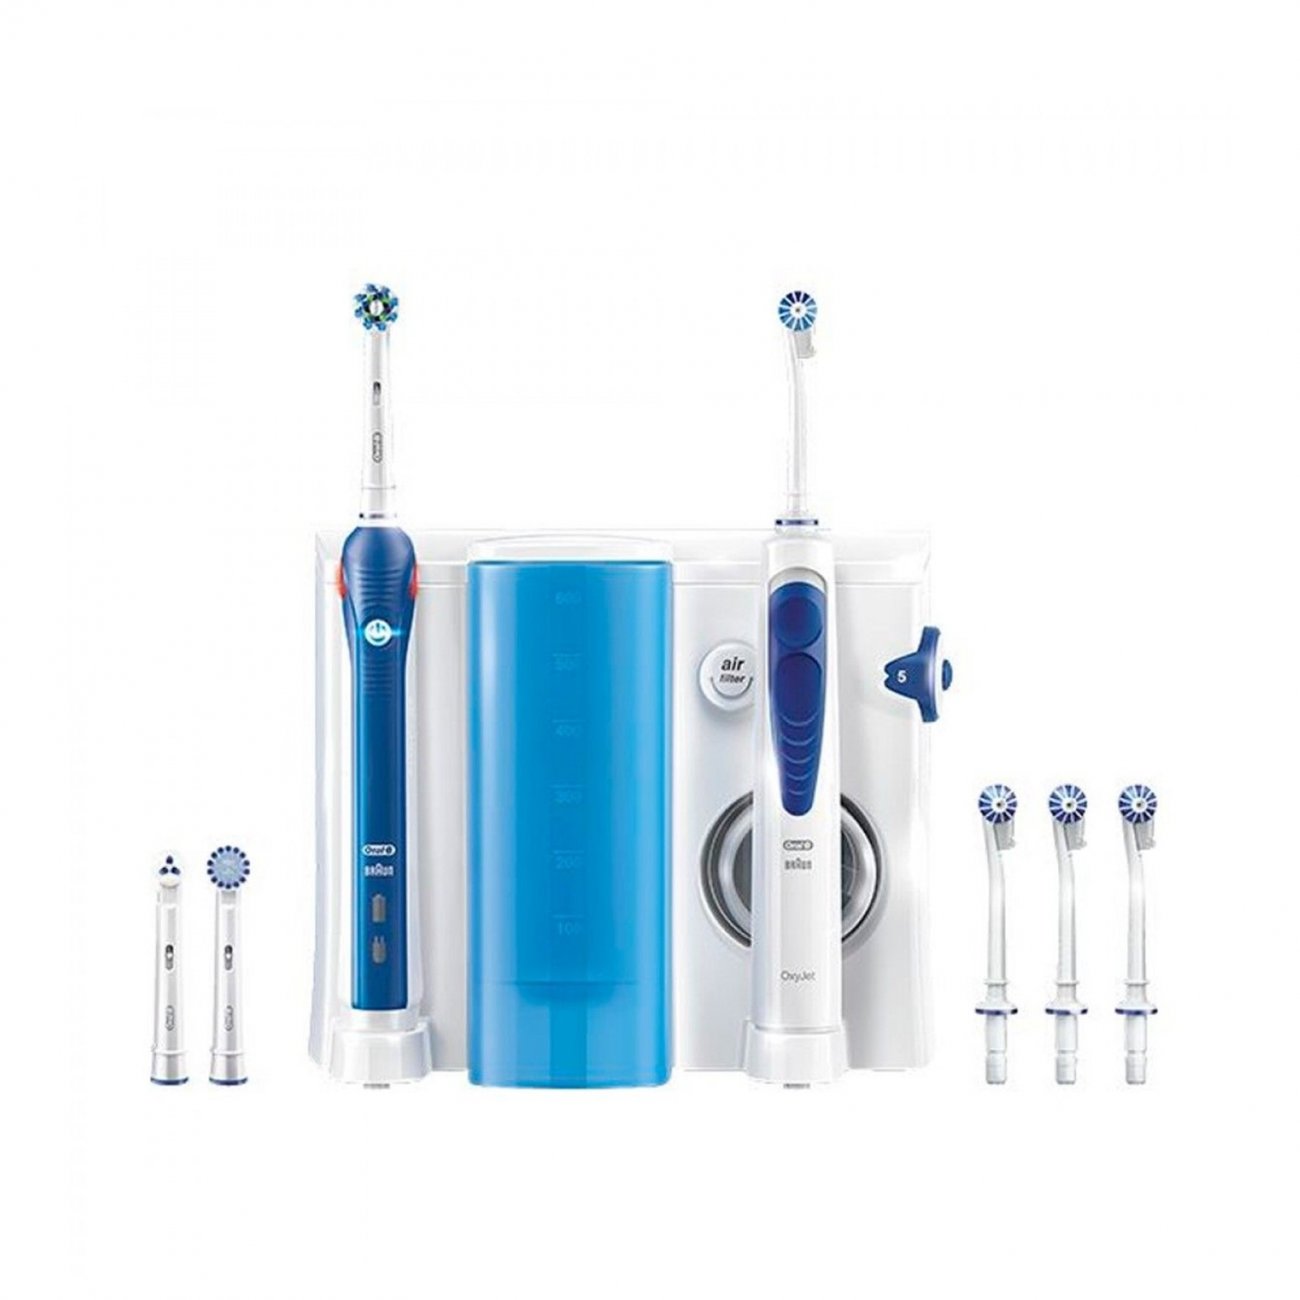 vervaldatum hemel Glimmend Buy PROMOTIONAL PACK:Oral-B Oxyjet Cleaning System + Pro 2000 Electric  Toothbrush · USA